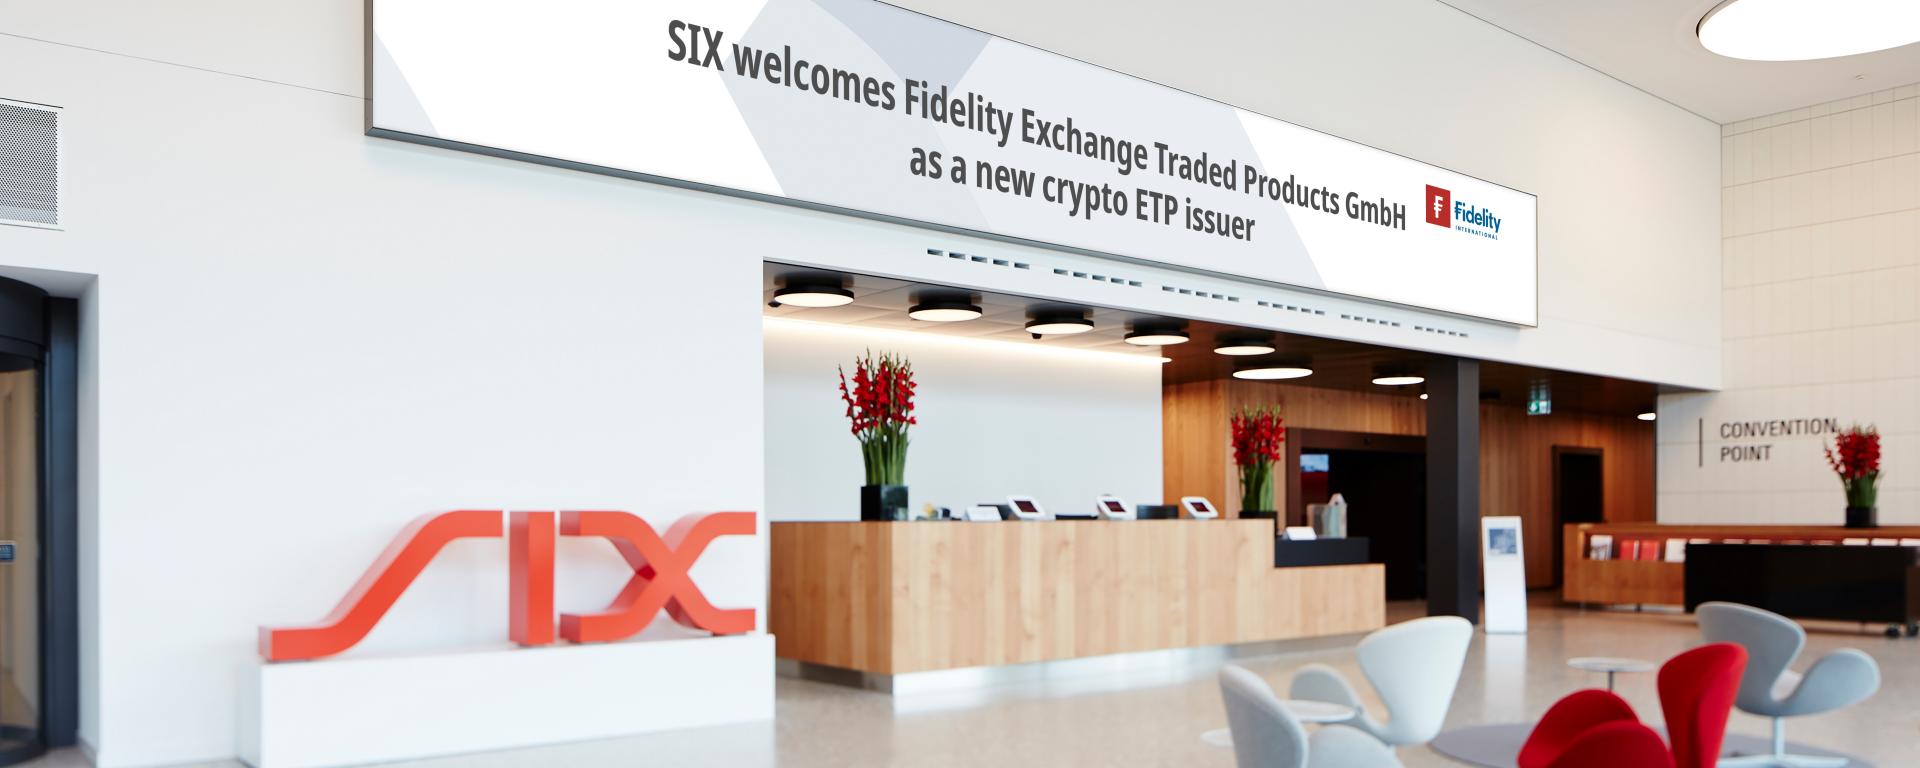  fidelity bitcoin products traded exchange two launched 